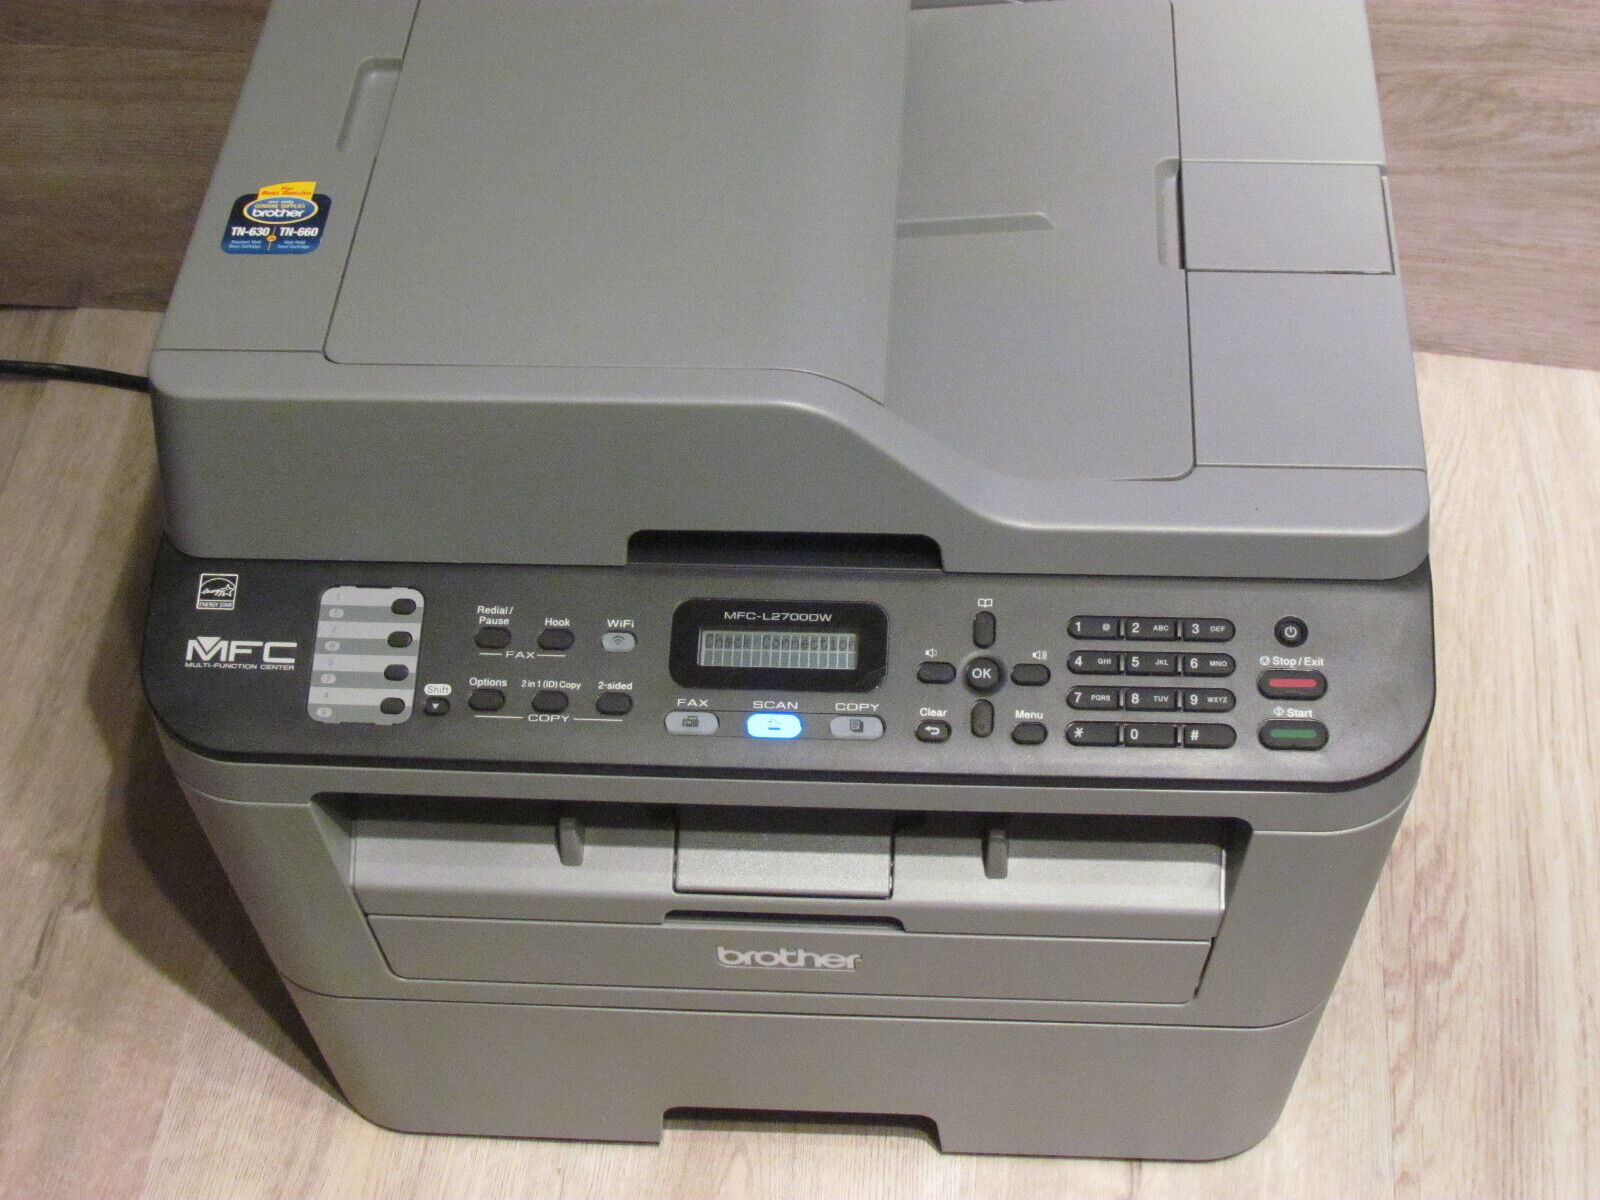 Brother MFCL2700DW Compact Laser All-in-One Printer Used Working Needs Toner